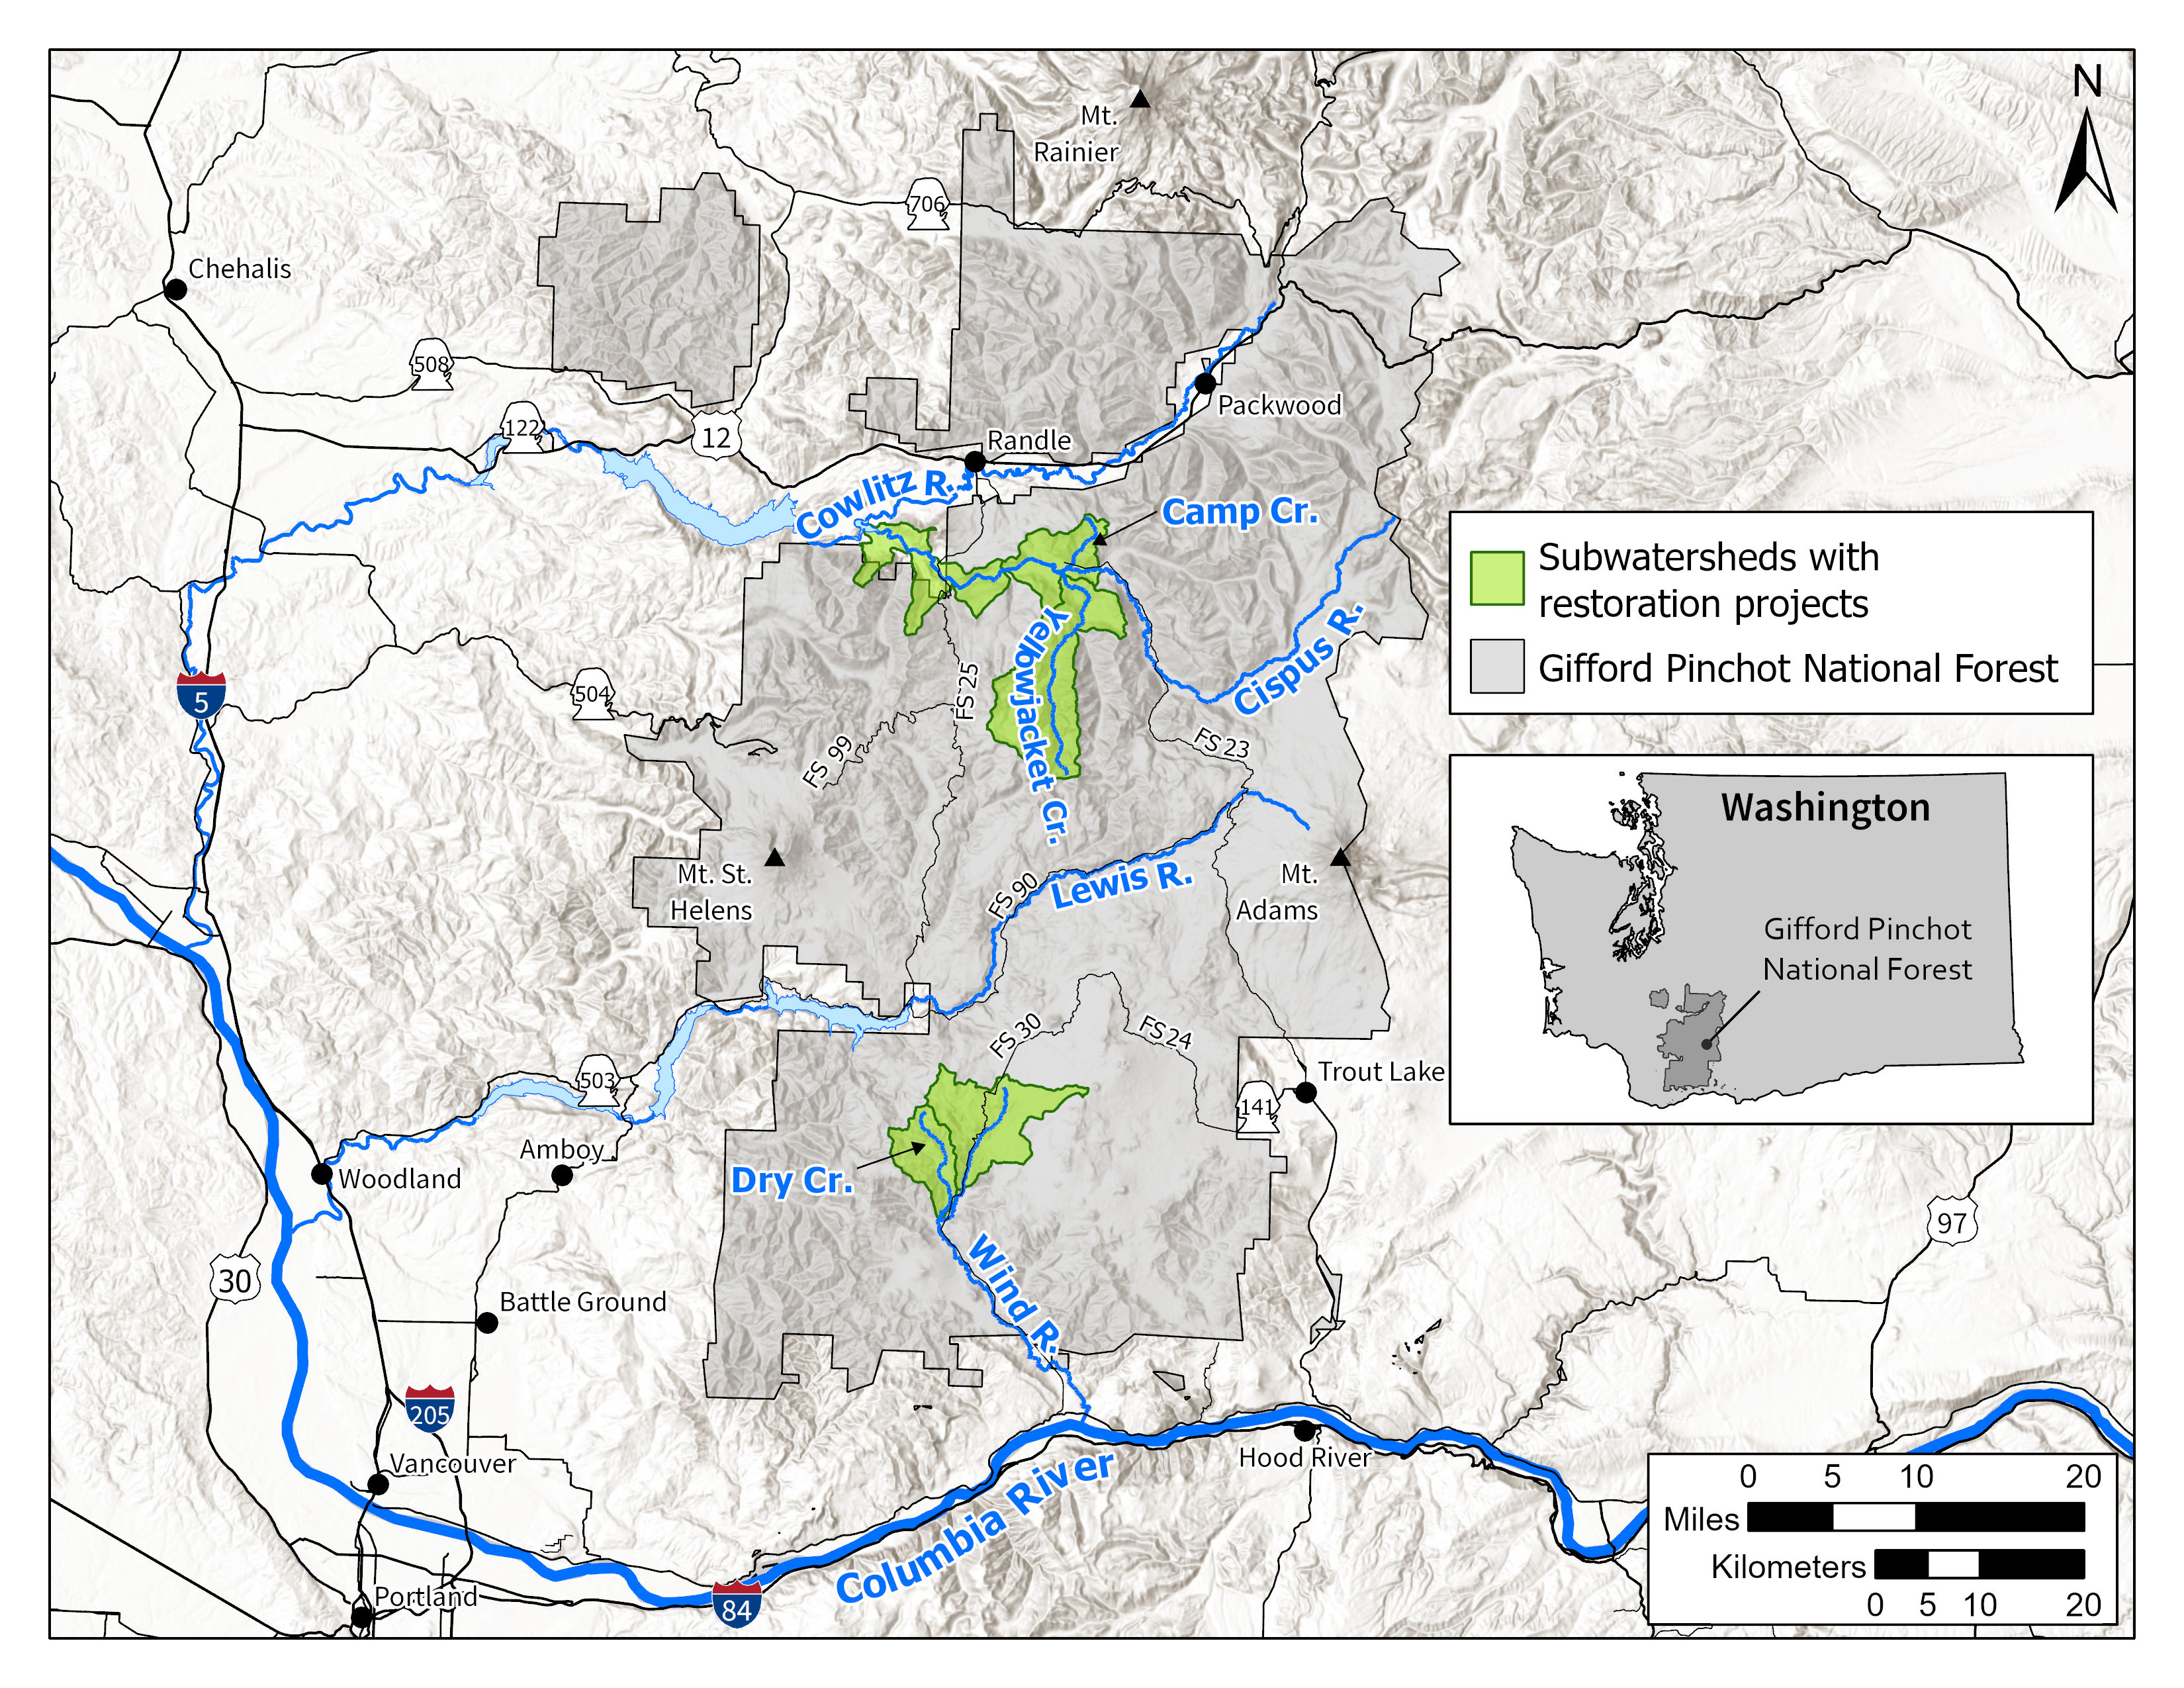 a map of the Gifford Pinchot National Forest